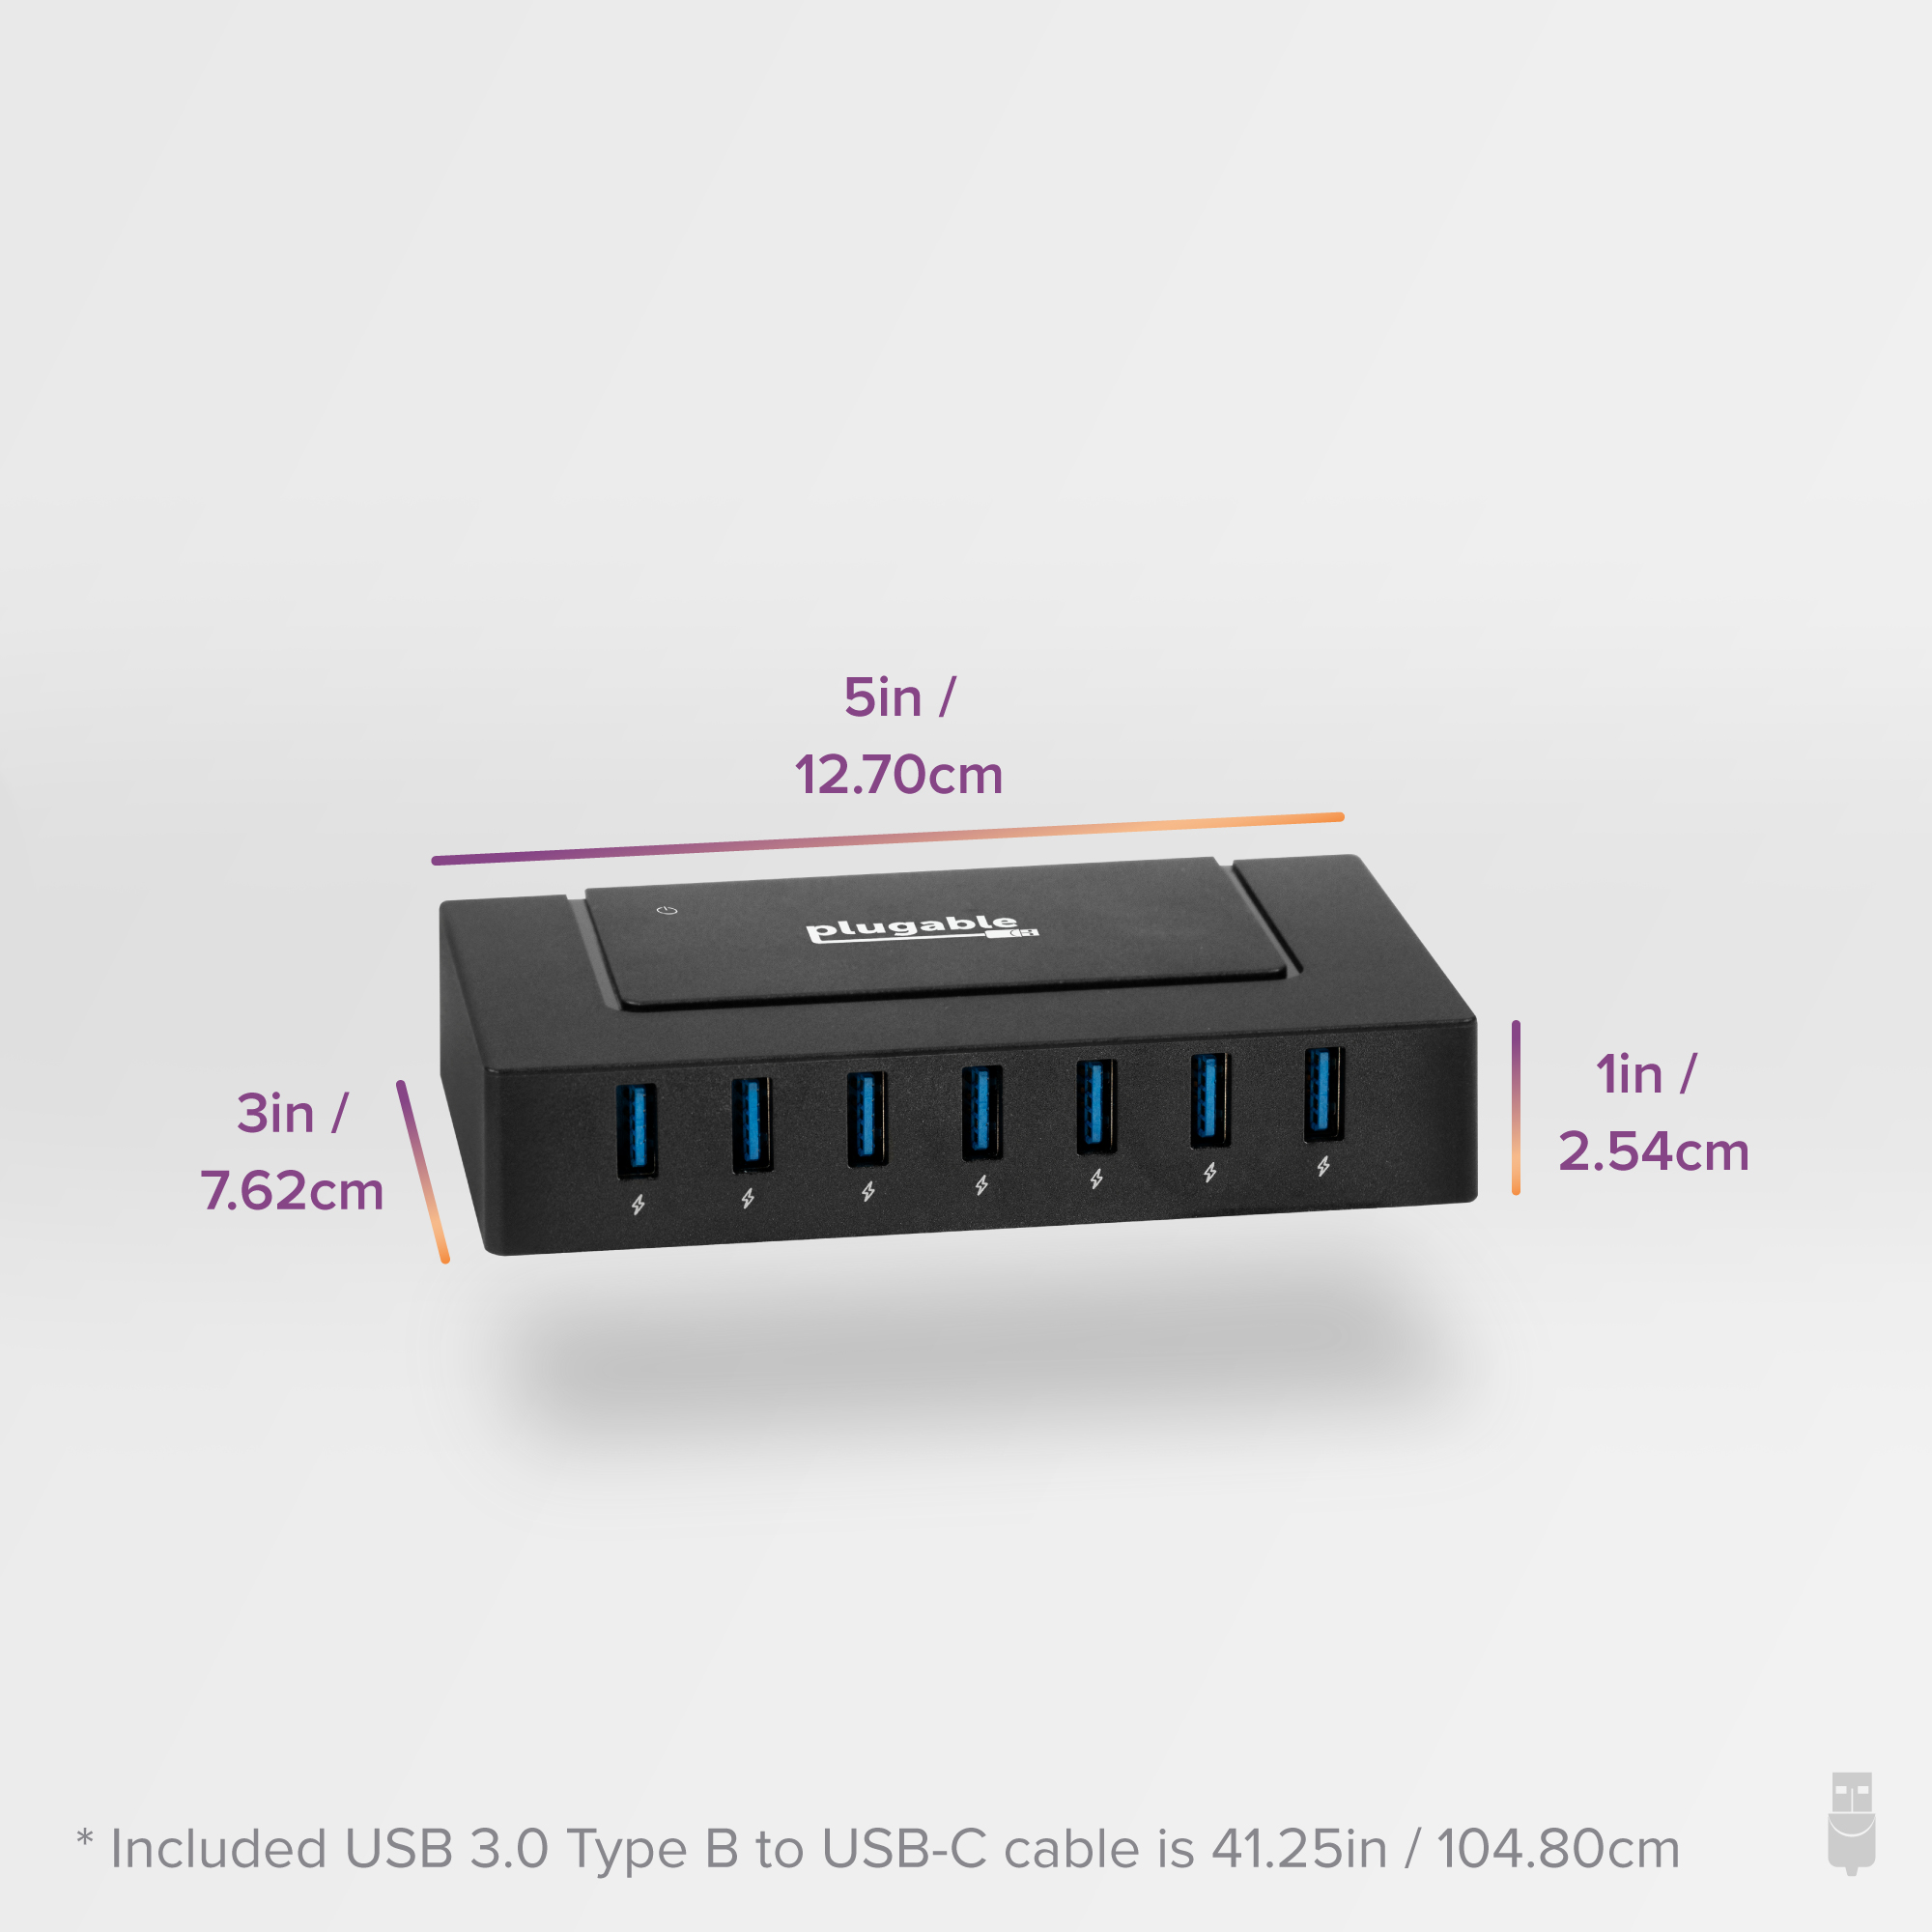 Plugable 7-in-1 USB Powered Hub for Laptops with USB-C or USB 3.0 - USB Power Station for Multiple Devices and USB Data Transfer with a 60W Power Adapter - image 5 of 9